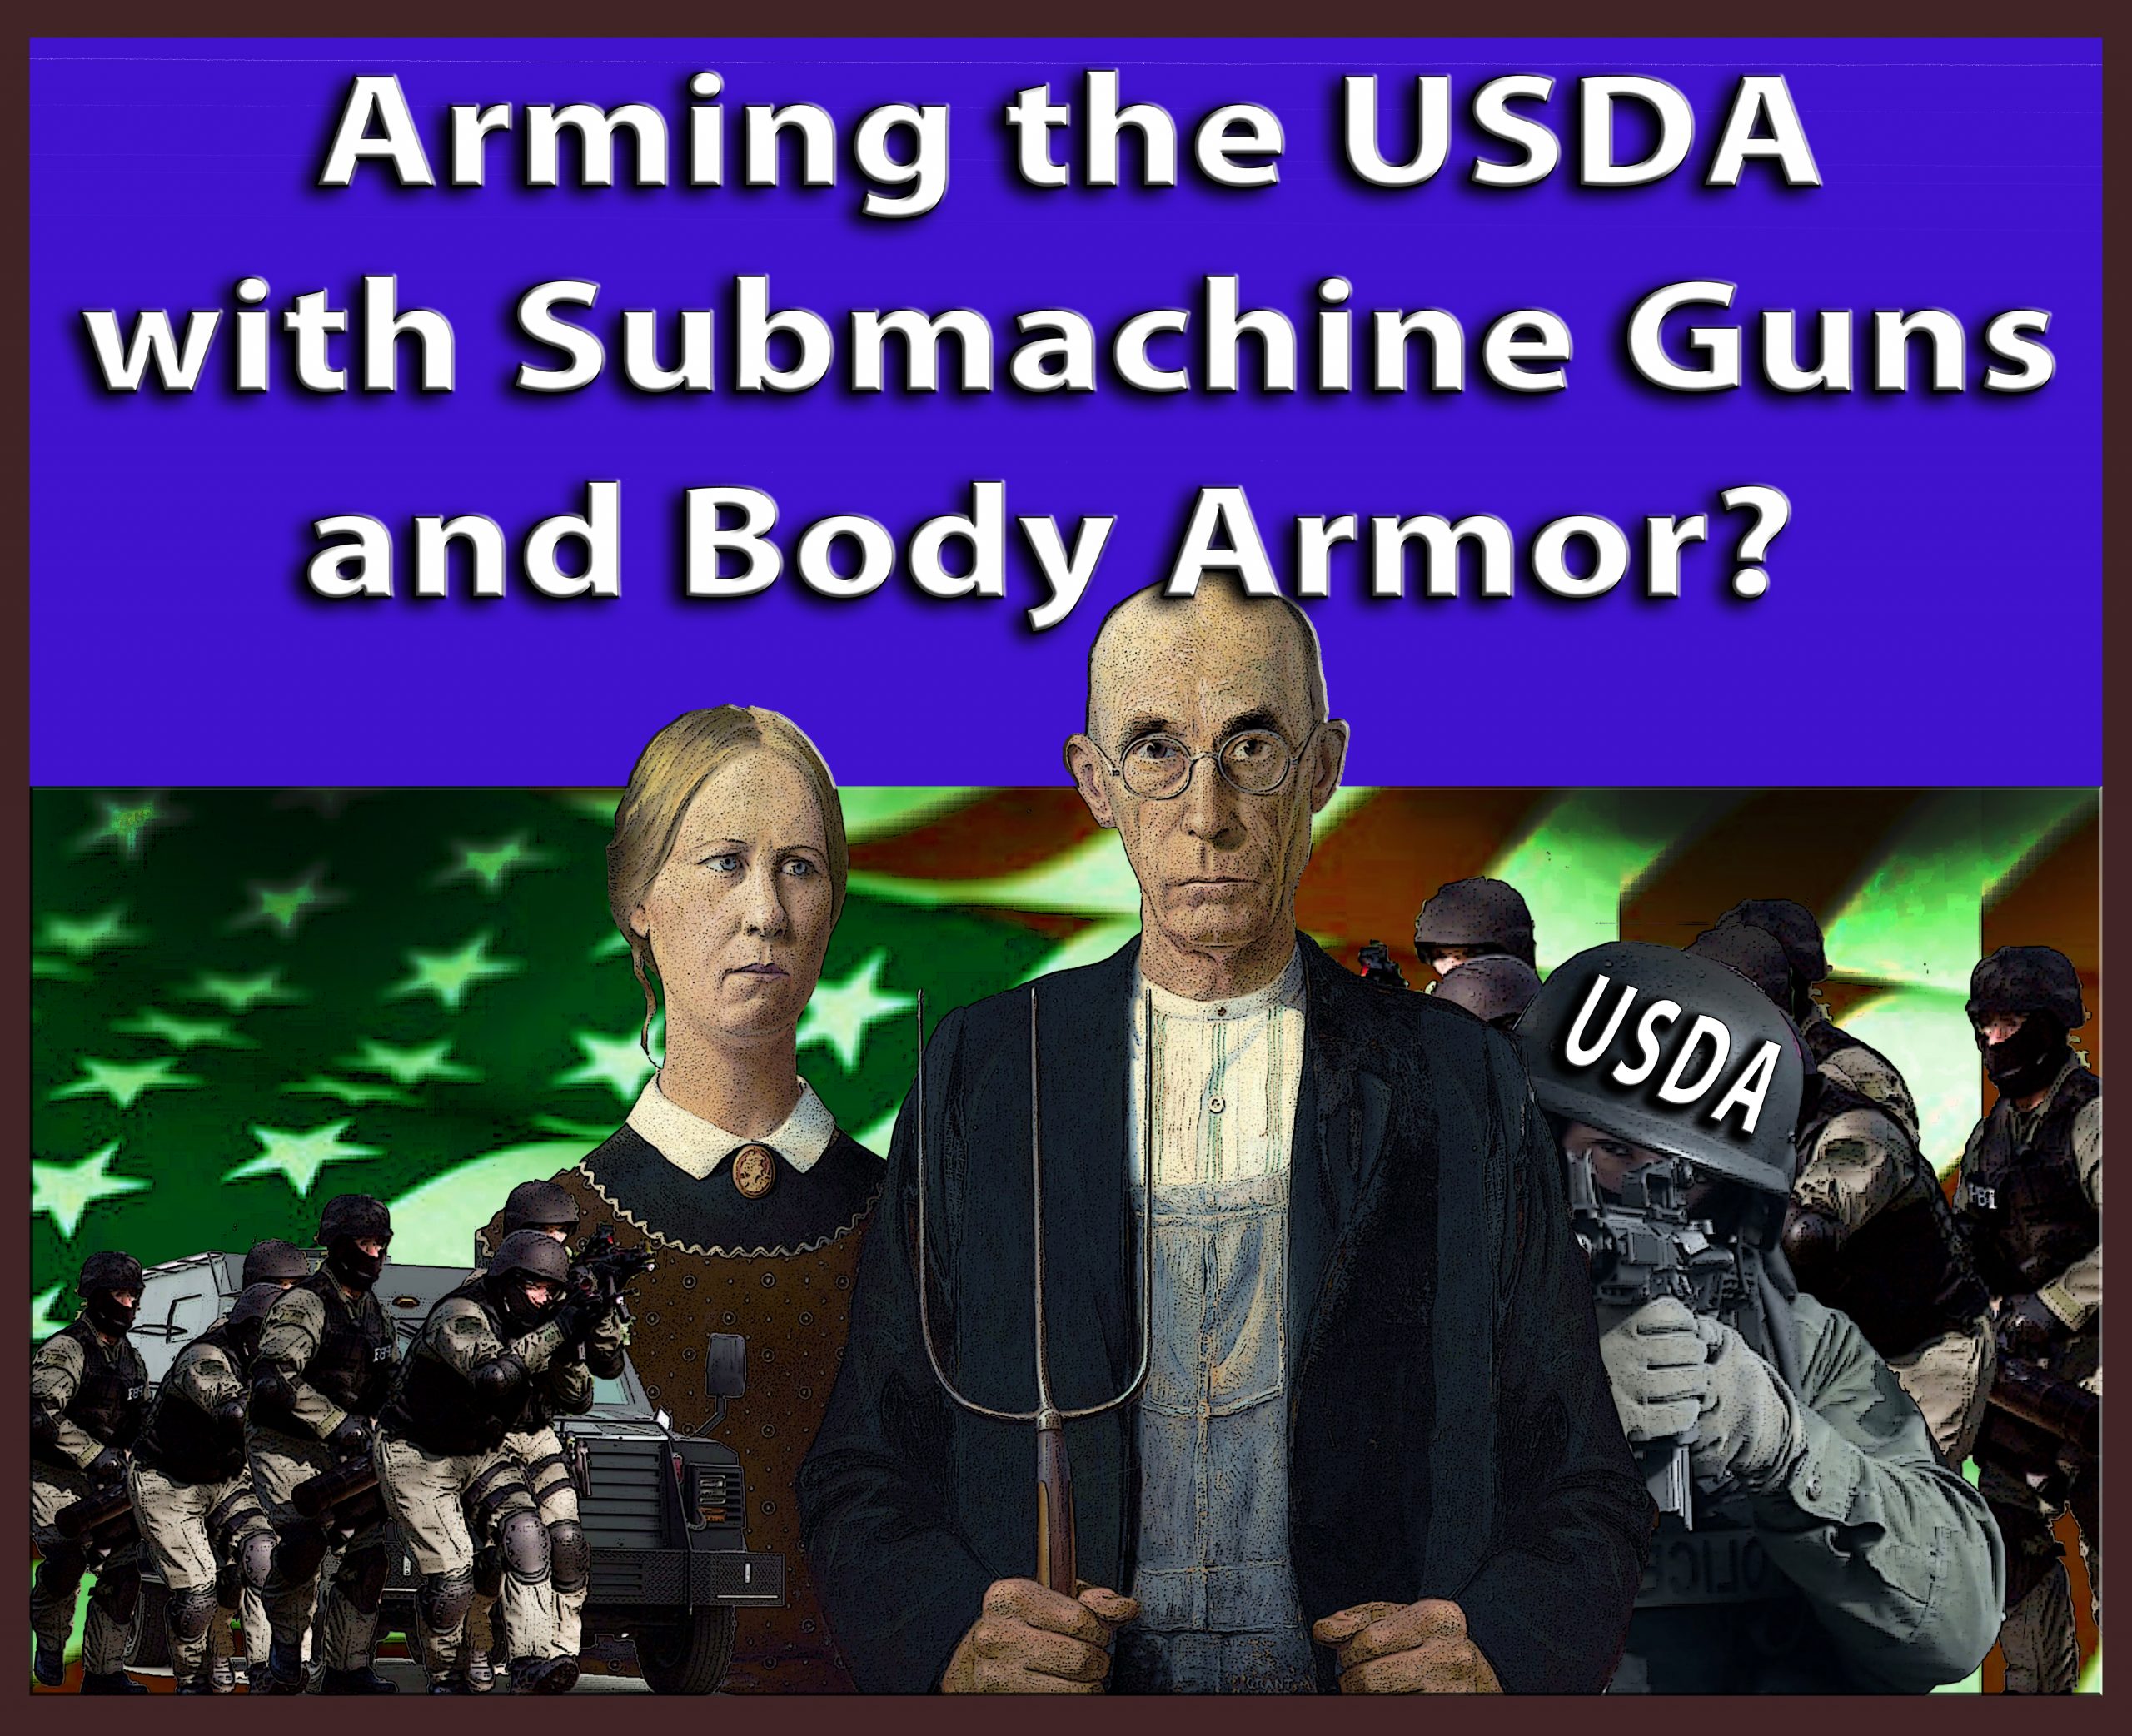 Michael Olson's Food Chain Radio Show: Why are we arming the United States Department of Agriculture with submachine guns and body armor?